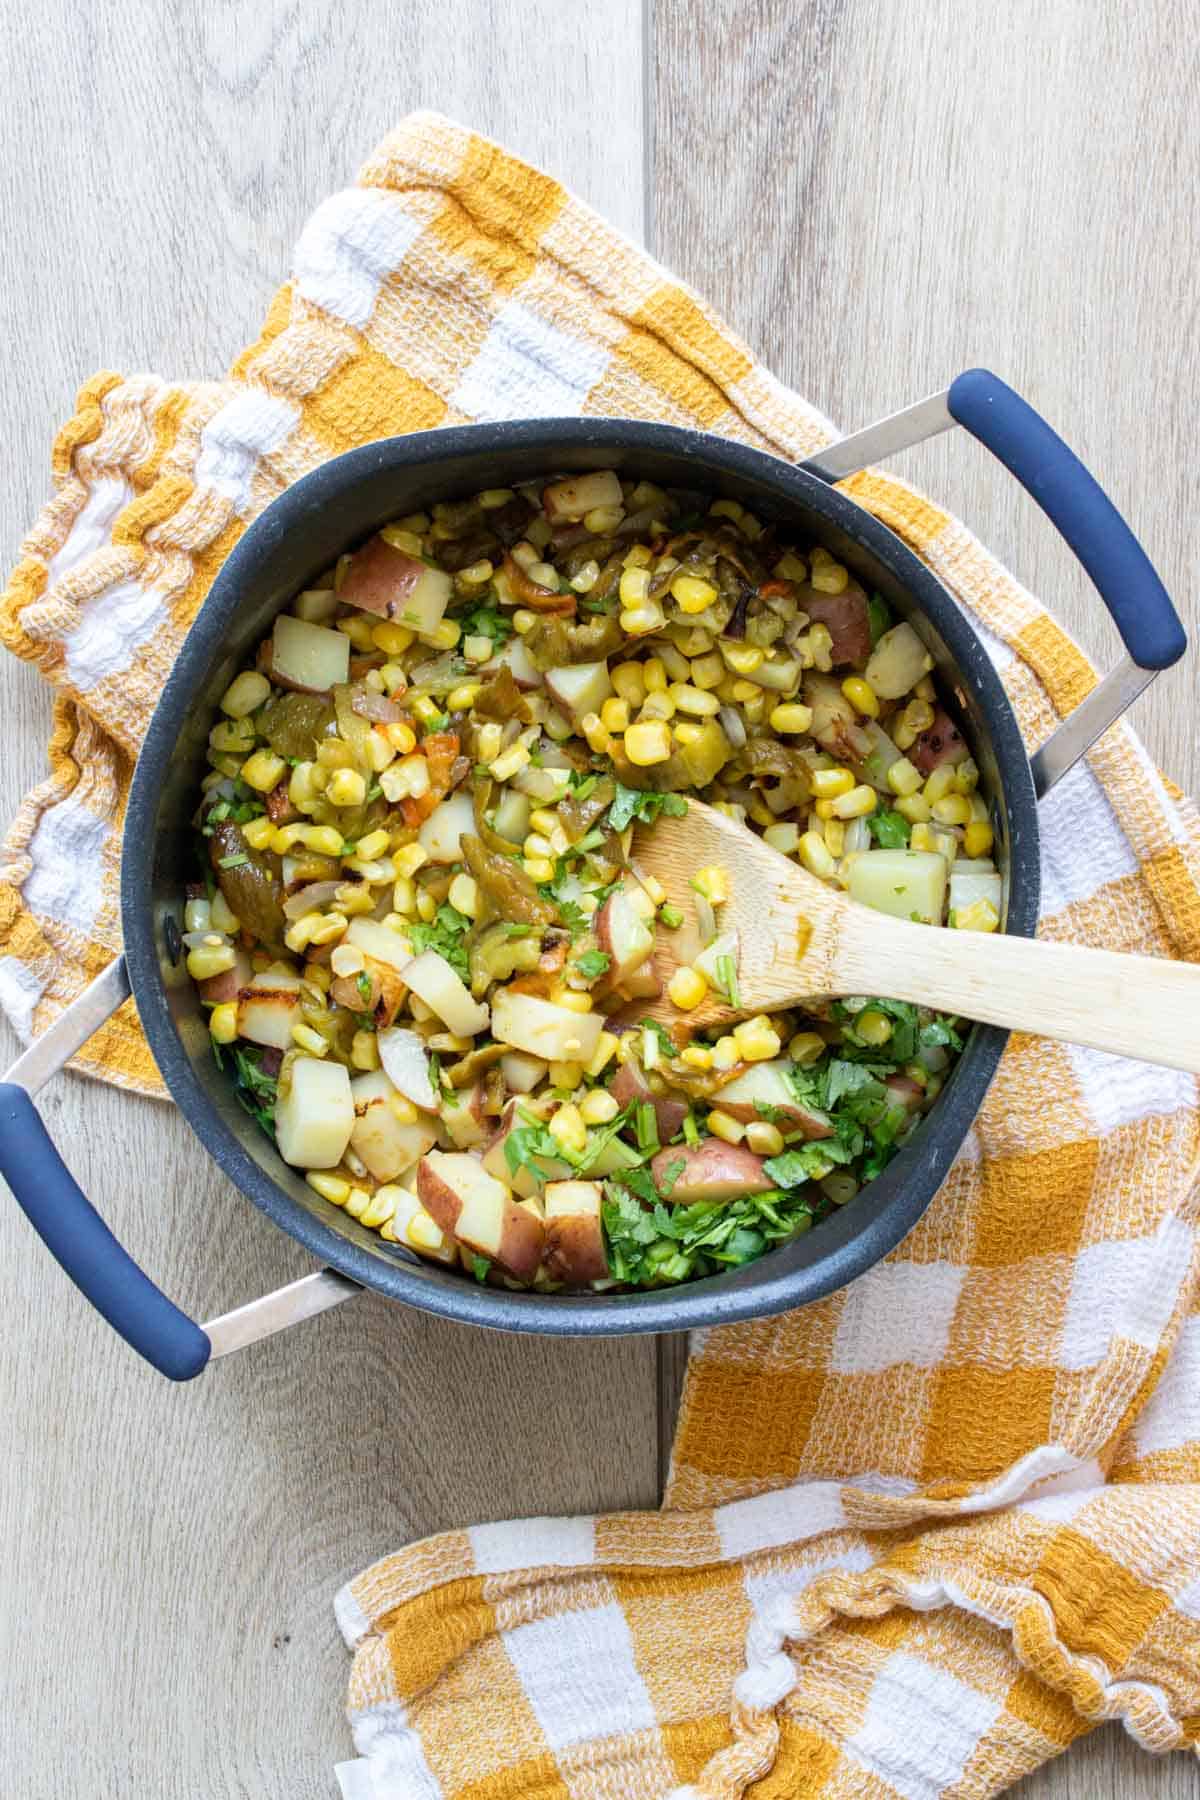 Wooden spoon mixing chopped potatoes, corn and peppers in a pot